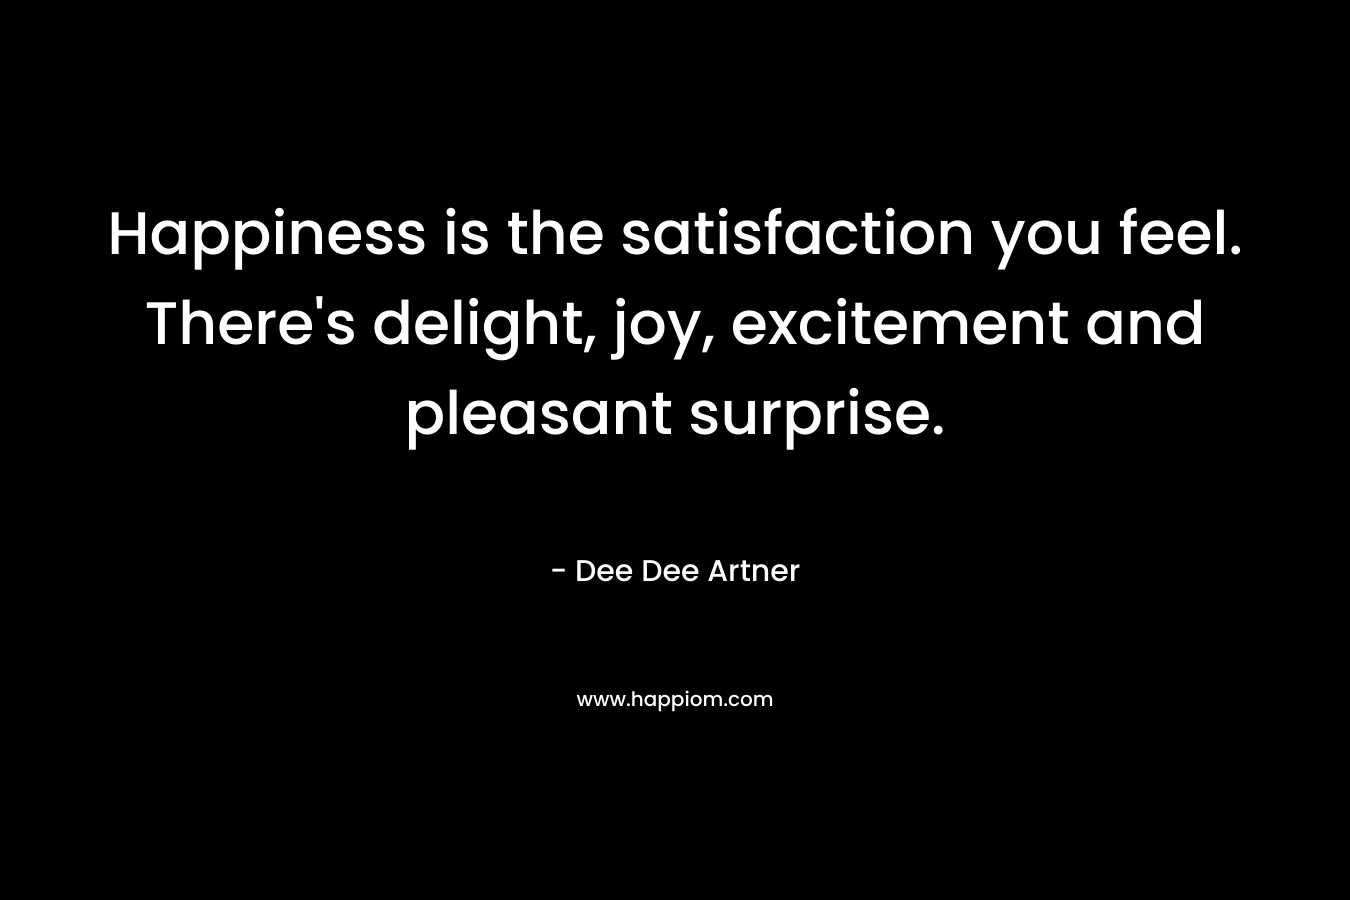 Happiness is the satisfaction you feel. There’s delight, joy, excitement and pleasant surprise. – Dee Dee Artner